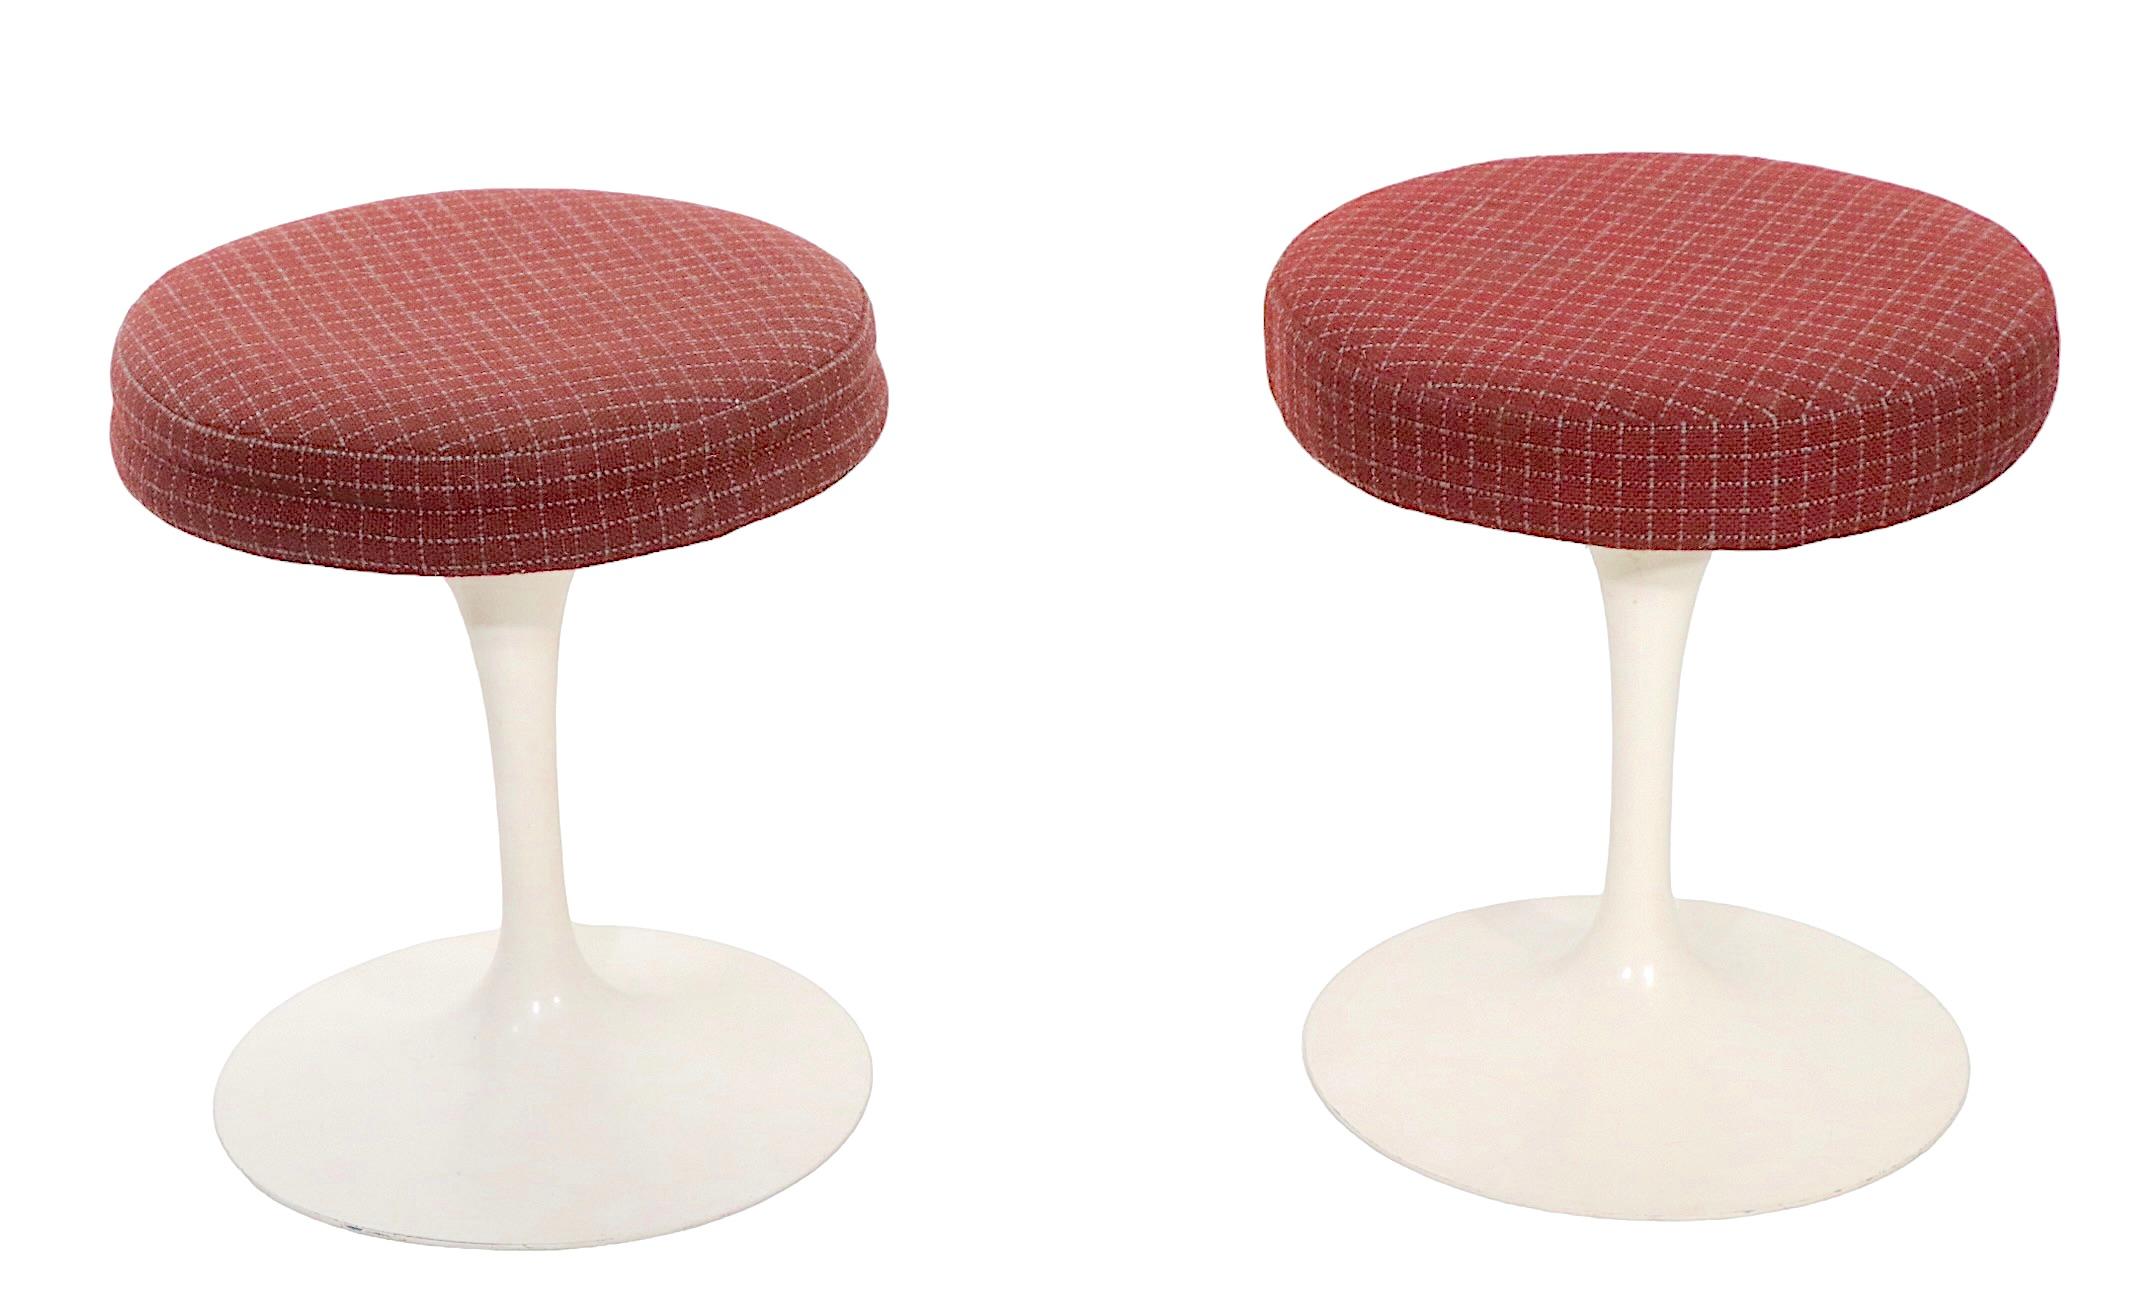 Pr. Tulip Style Stools Designed by Saarinen for Knoll, circa 1970s-1980s 4